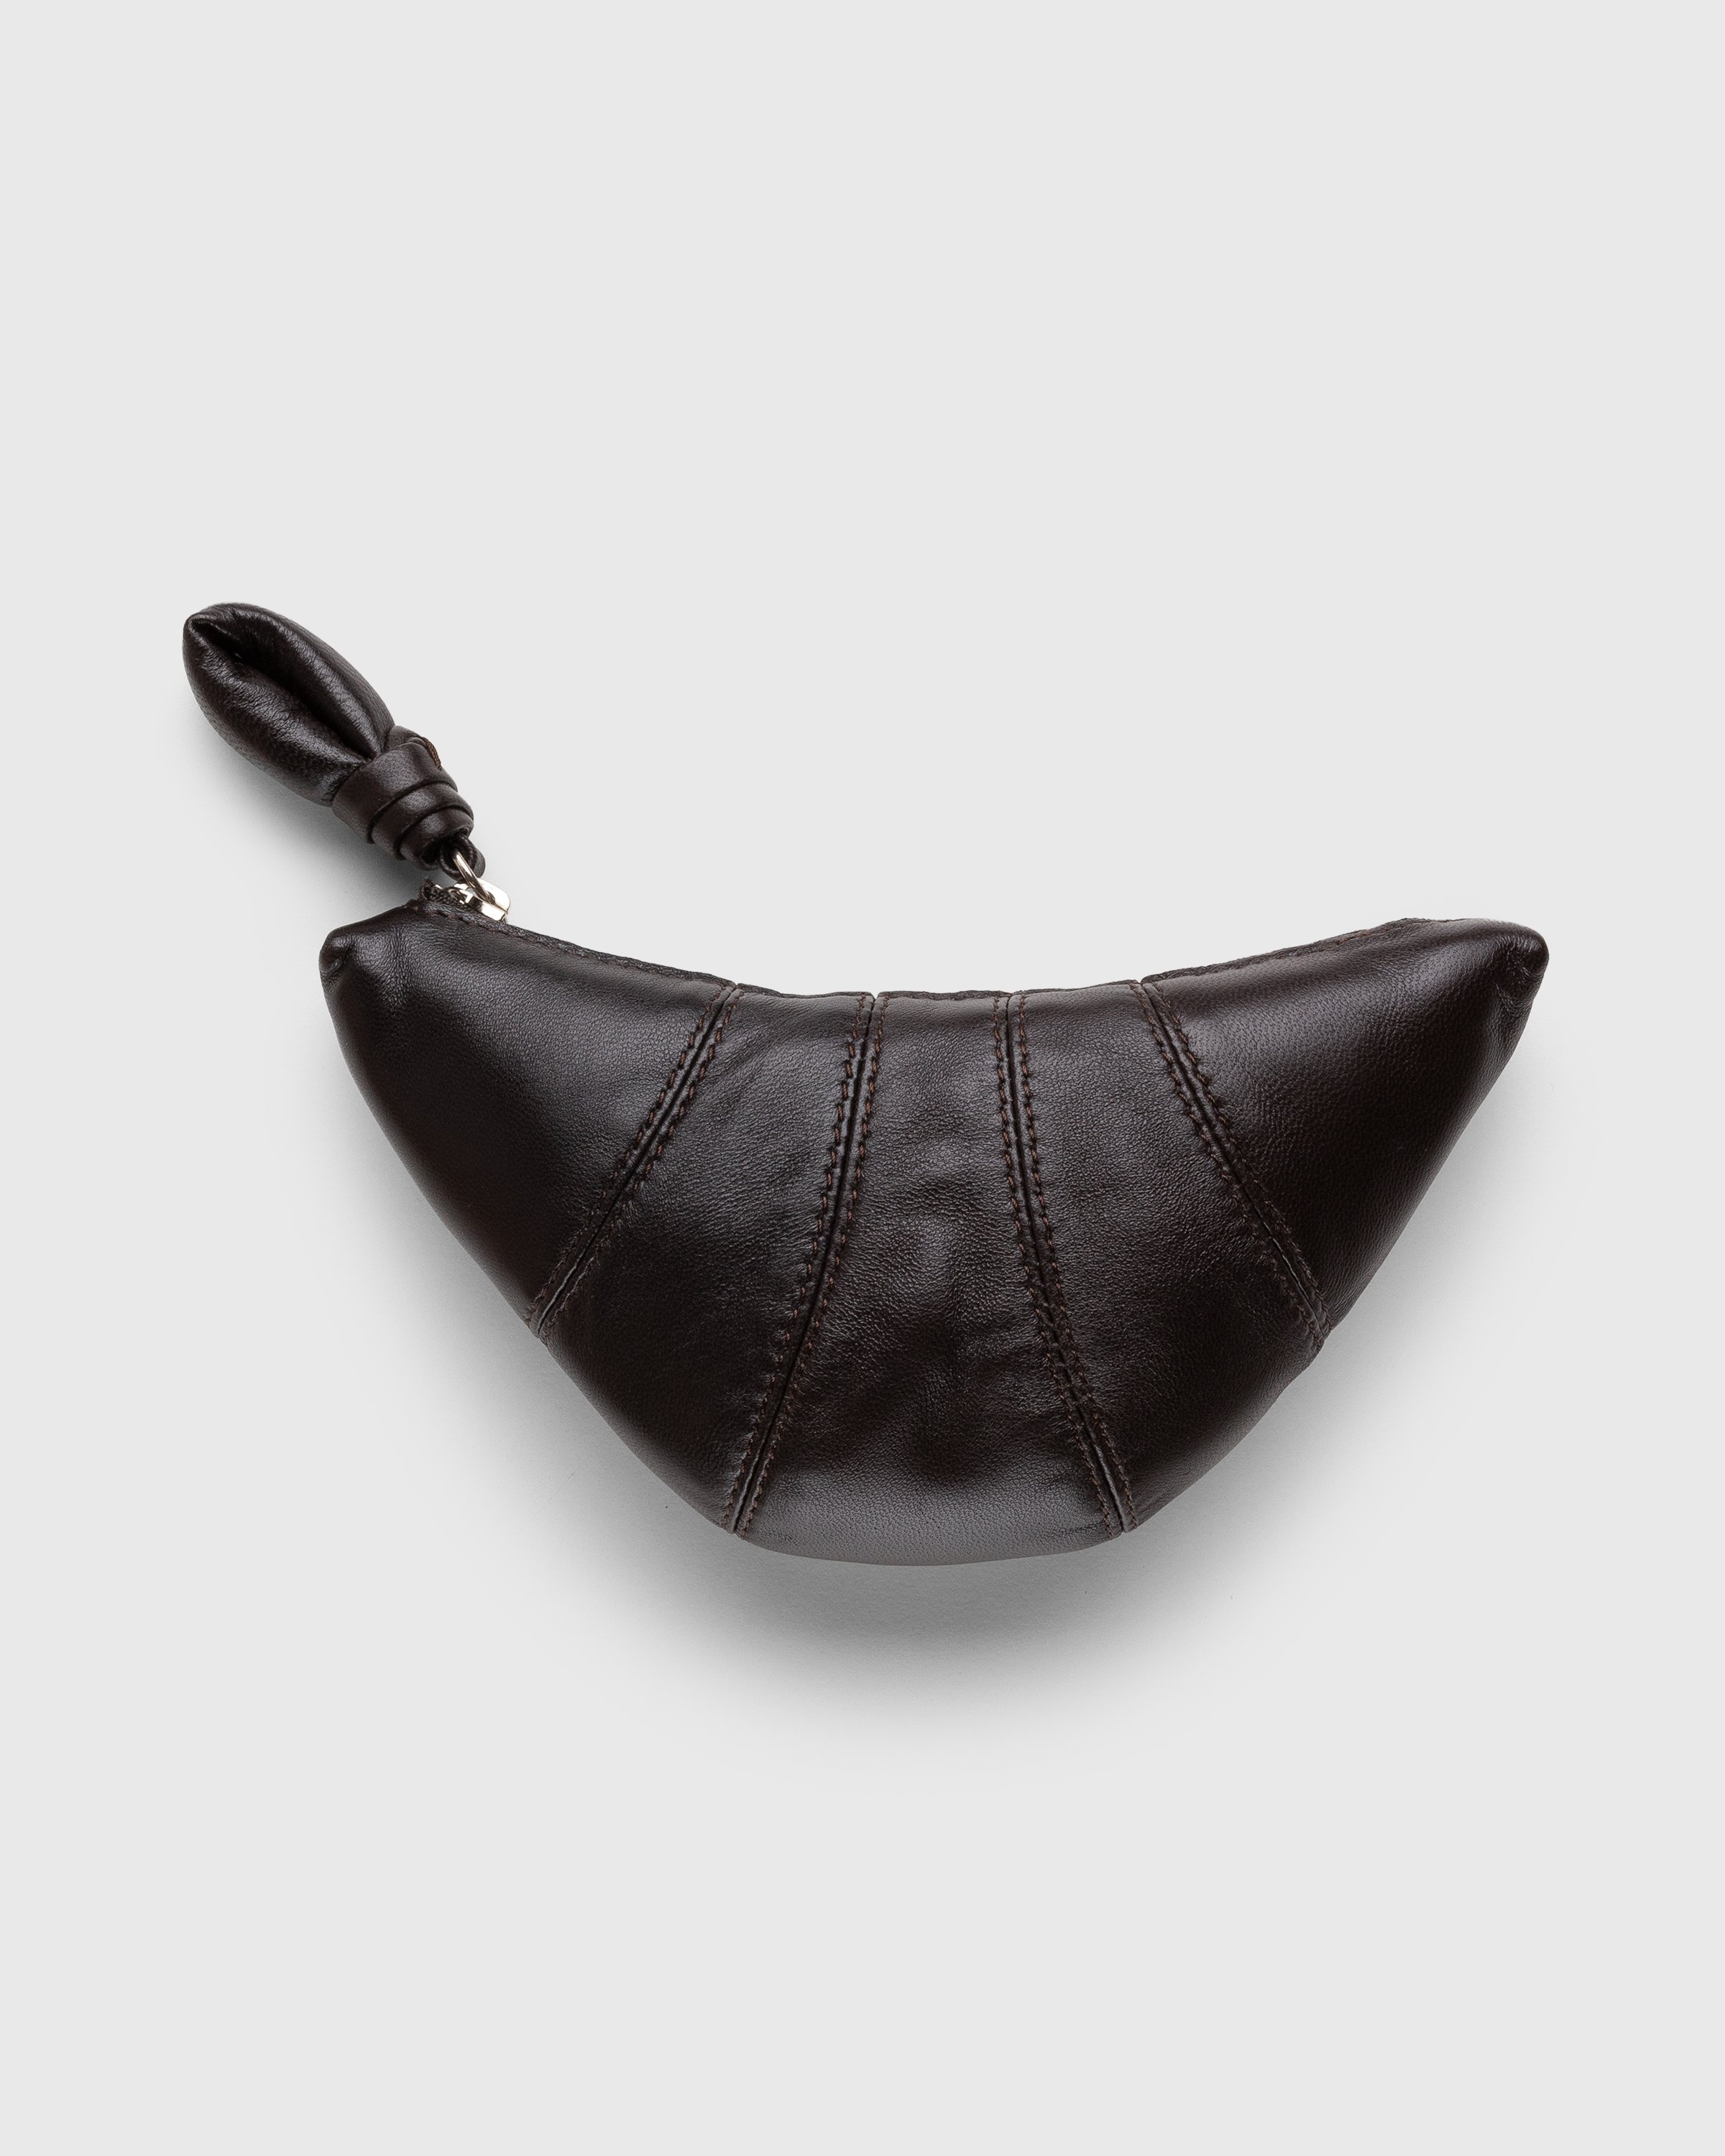 Lemaire x Highsnobiety – Not In Paris 4 Croissant Coin Purse Dark Chocolate - Wallets - Black - Image 1